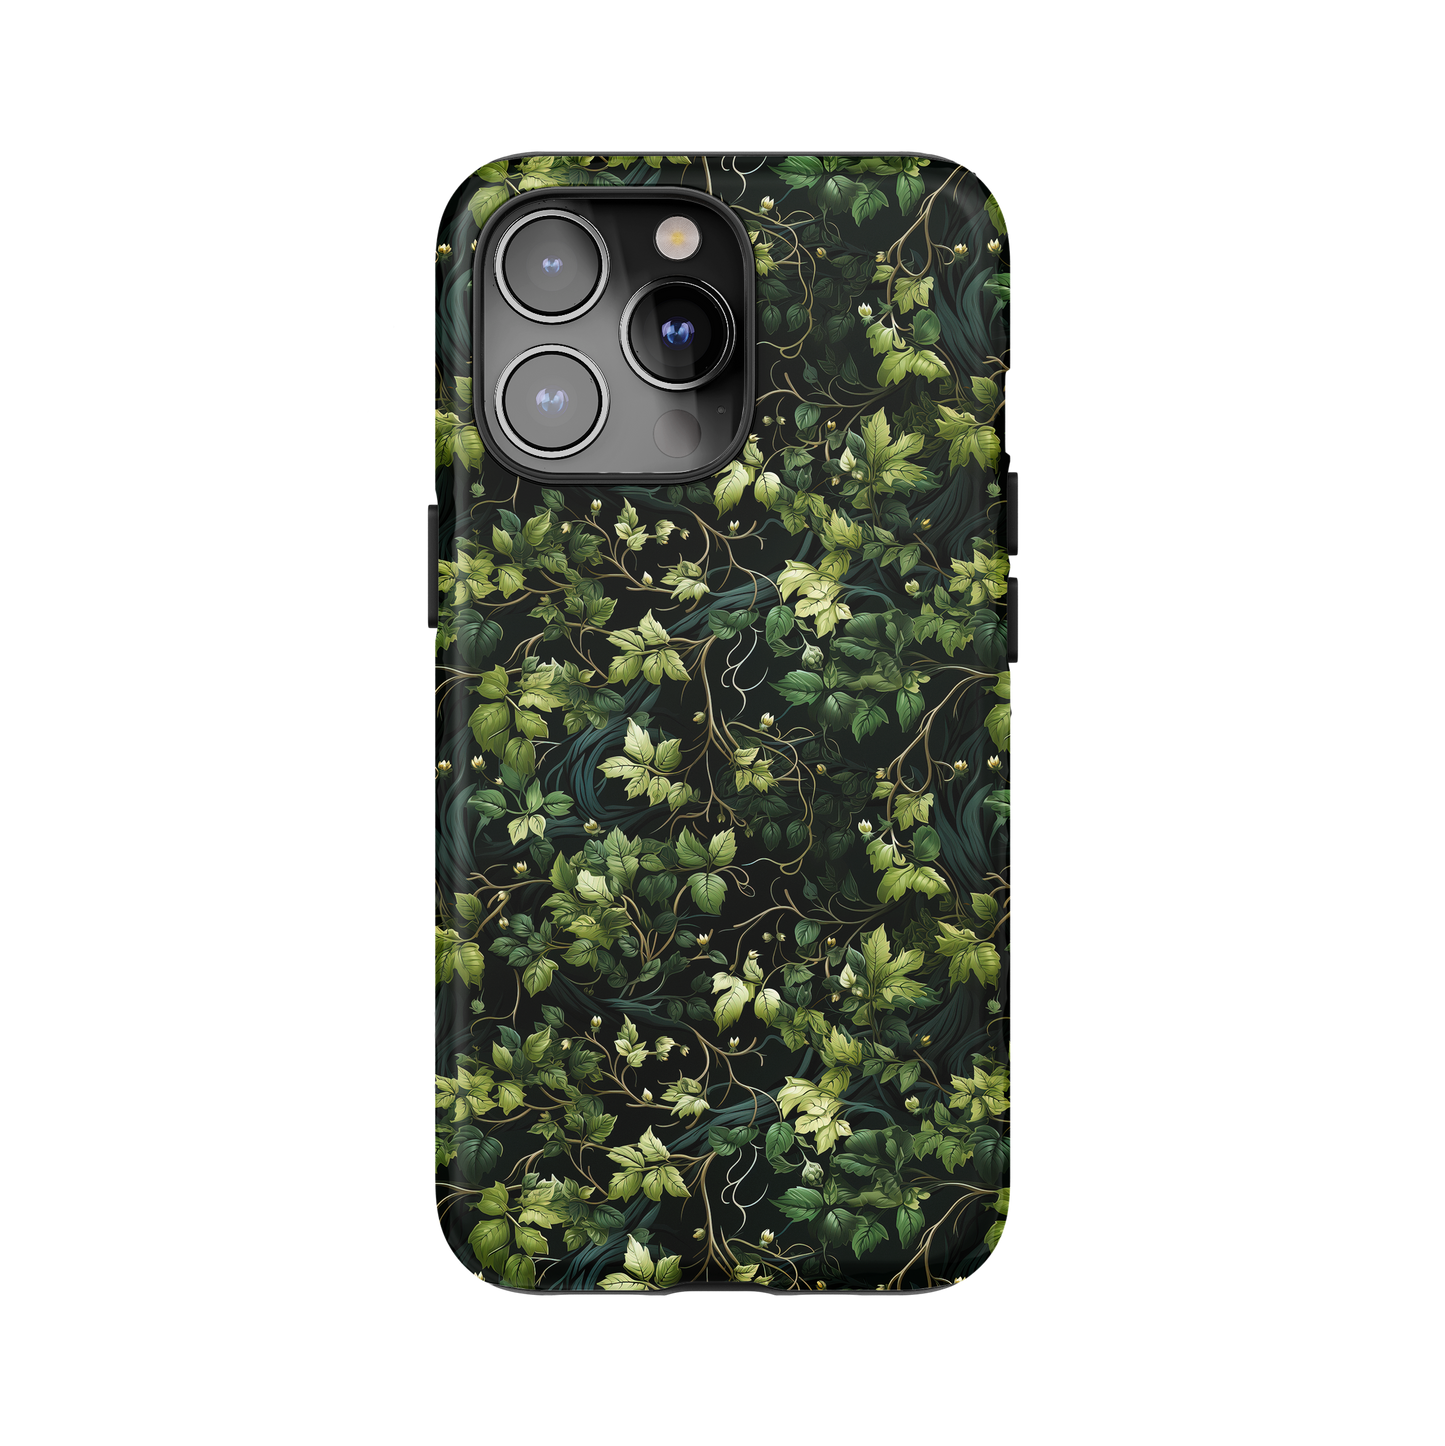 Gothic Floral Phone Case for iPhone and Samsung